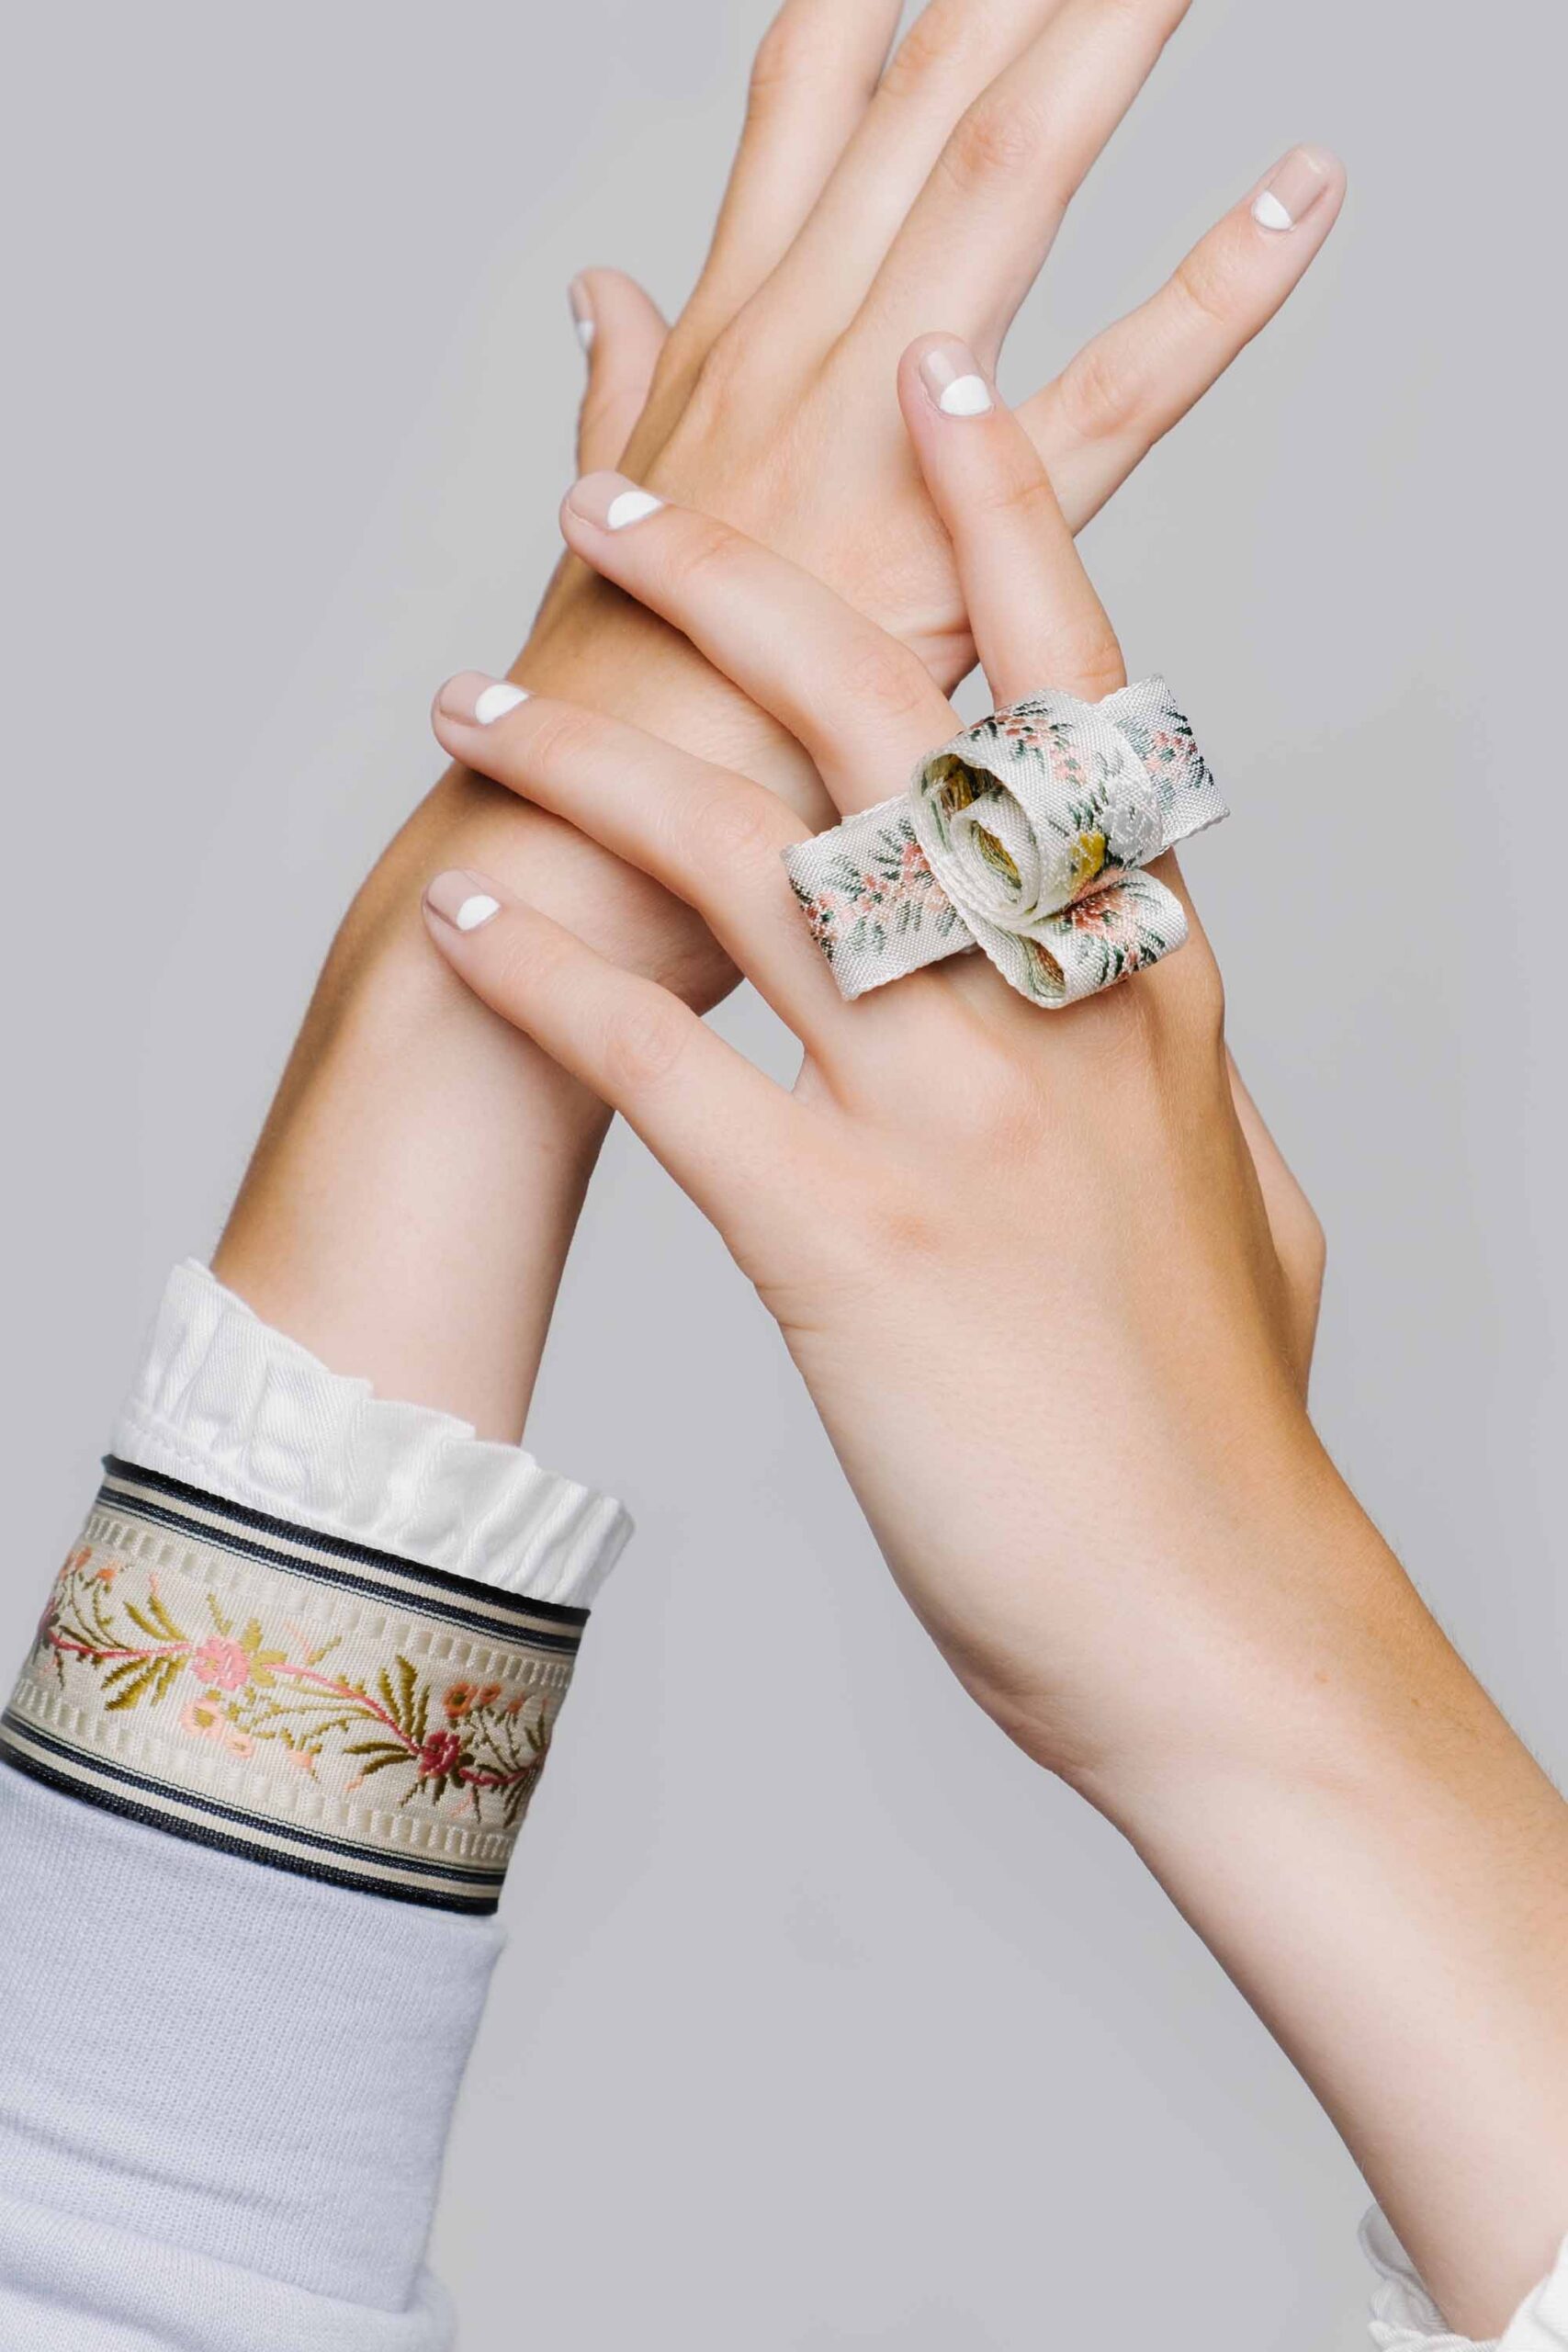 Art director in Los Angeles showcases minimalist elegance with a close-up of hands adorned with a floral fabric wrist accessory against a grey background.